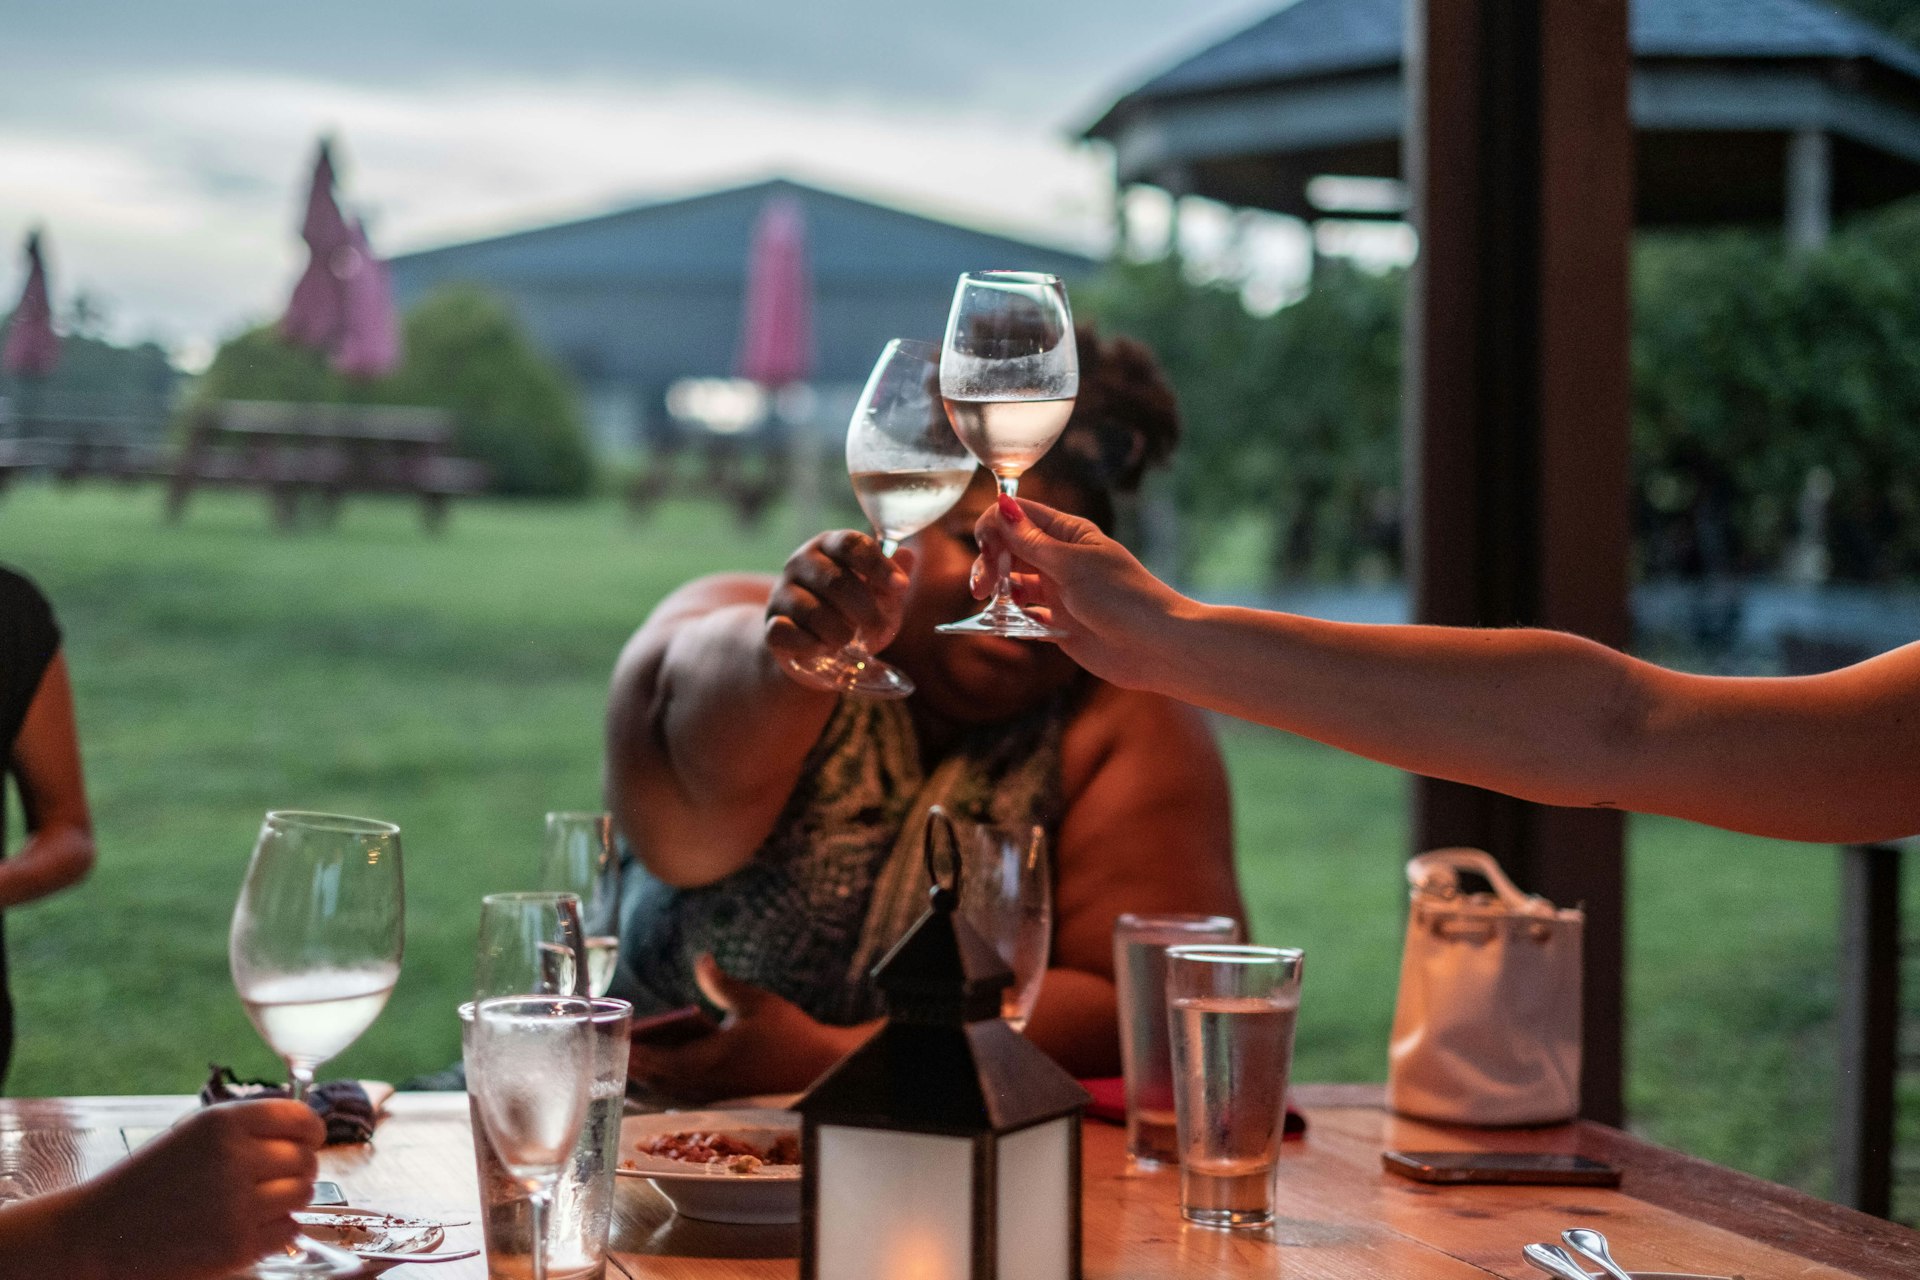 Diners raise a toast in the outdoor dining area at JOLO Winery & Vineyards